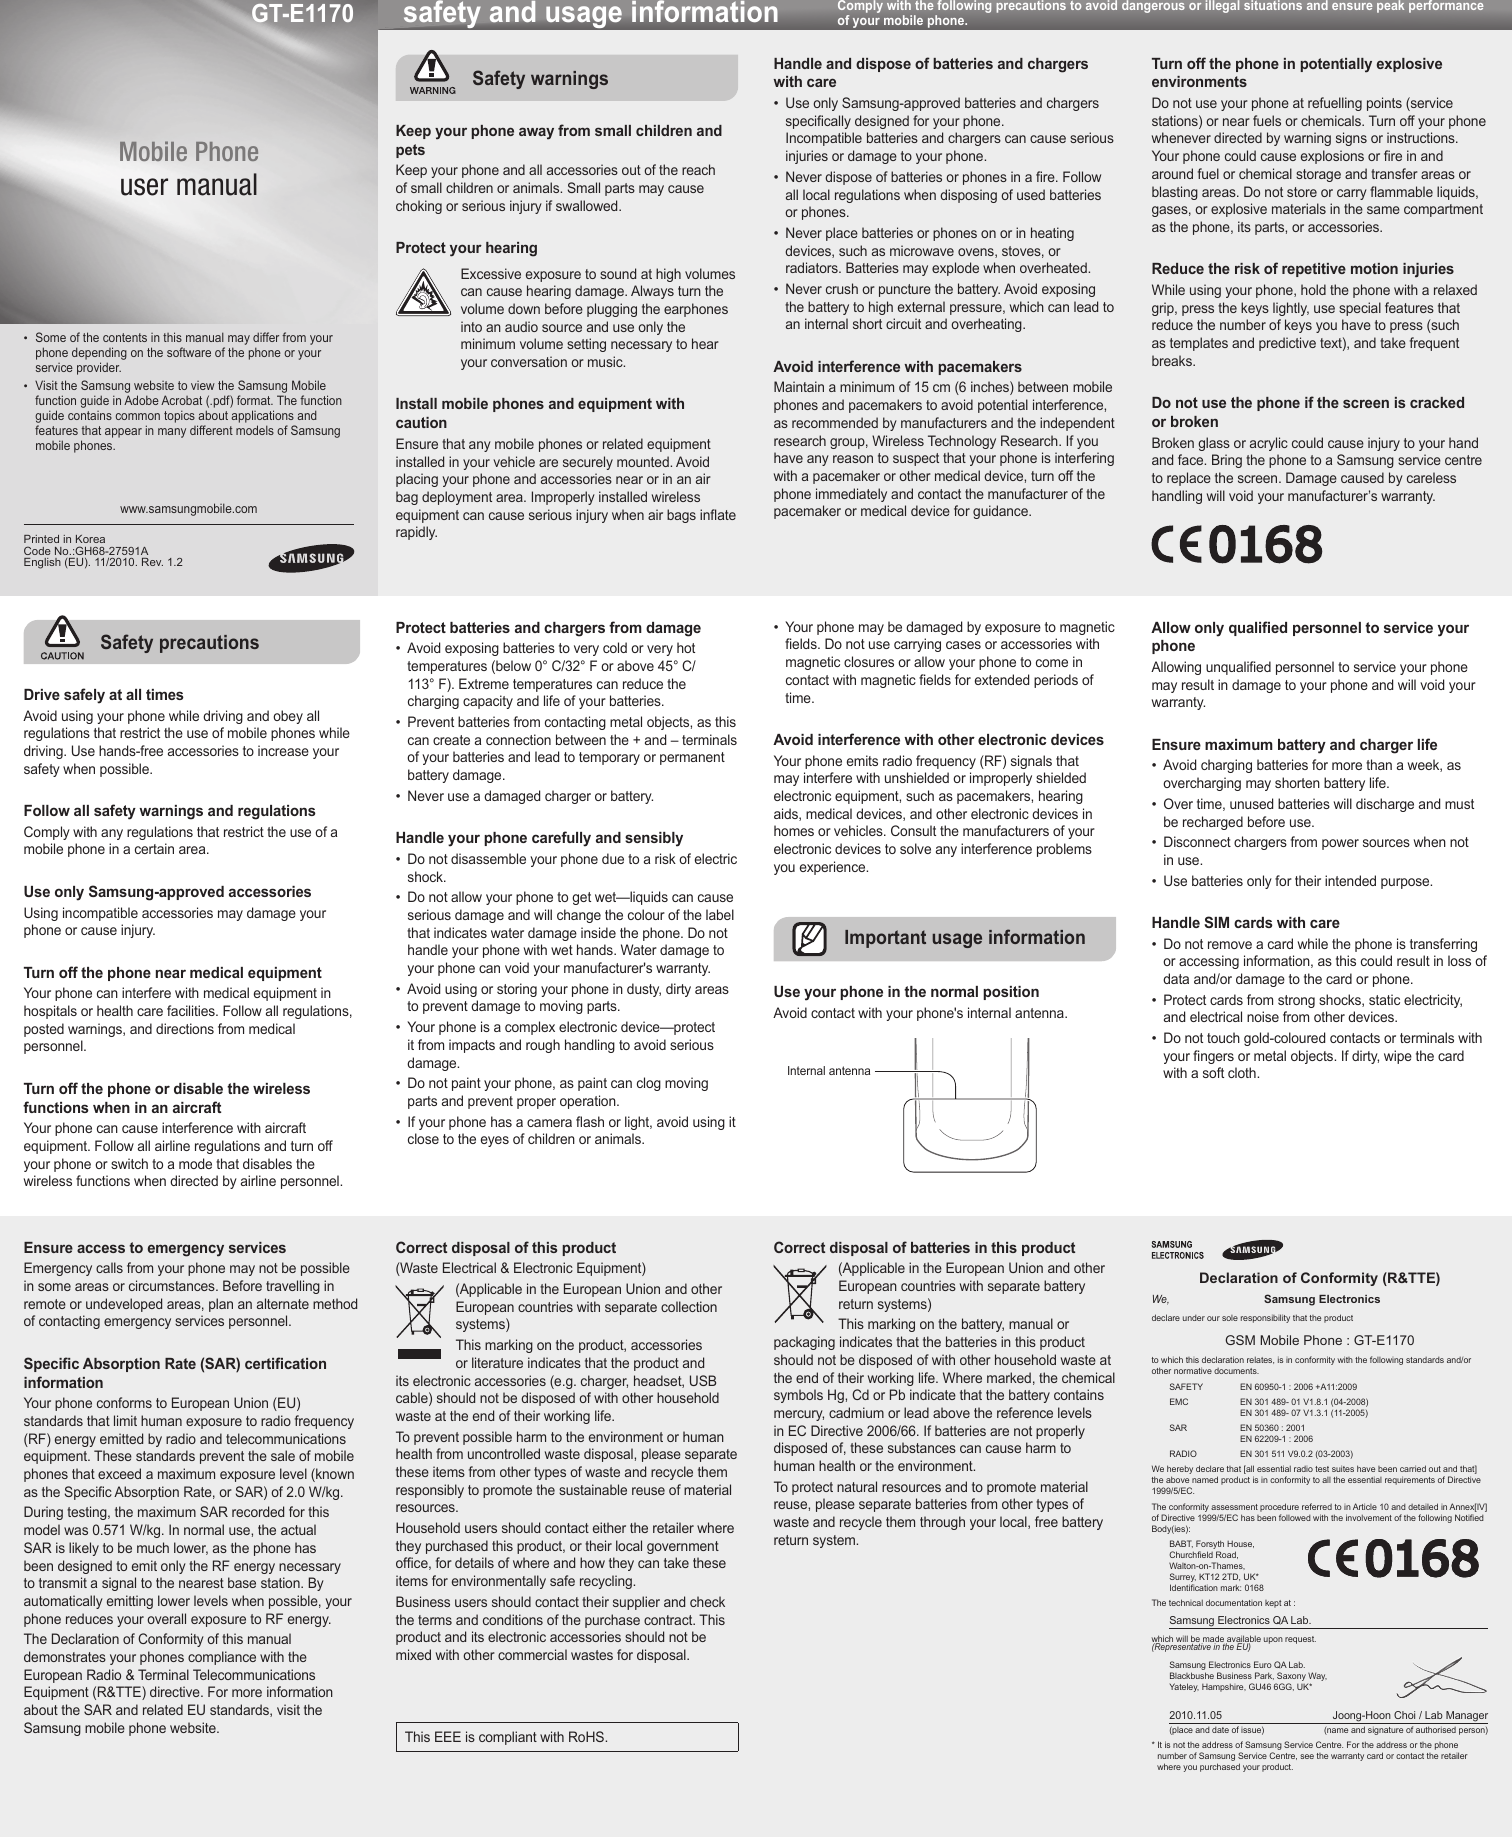 Page 1 of 2 - Samsung GT-E1170 User Manual  To The 62b5863d-ee45-423e-9ee2-c80949578baf